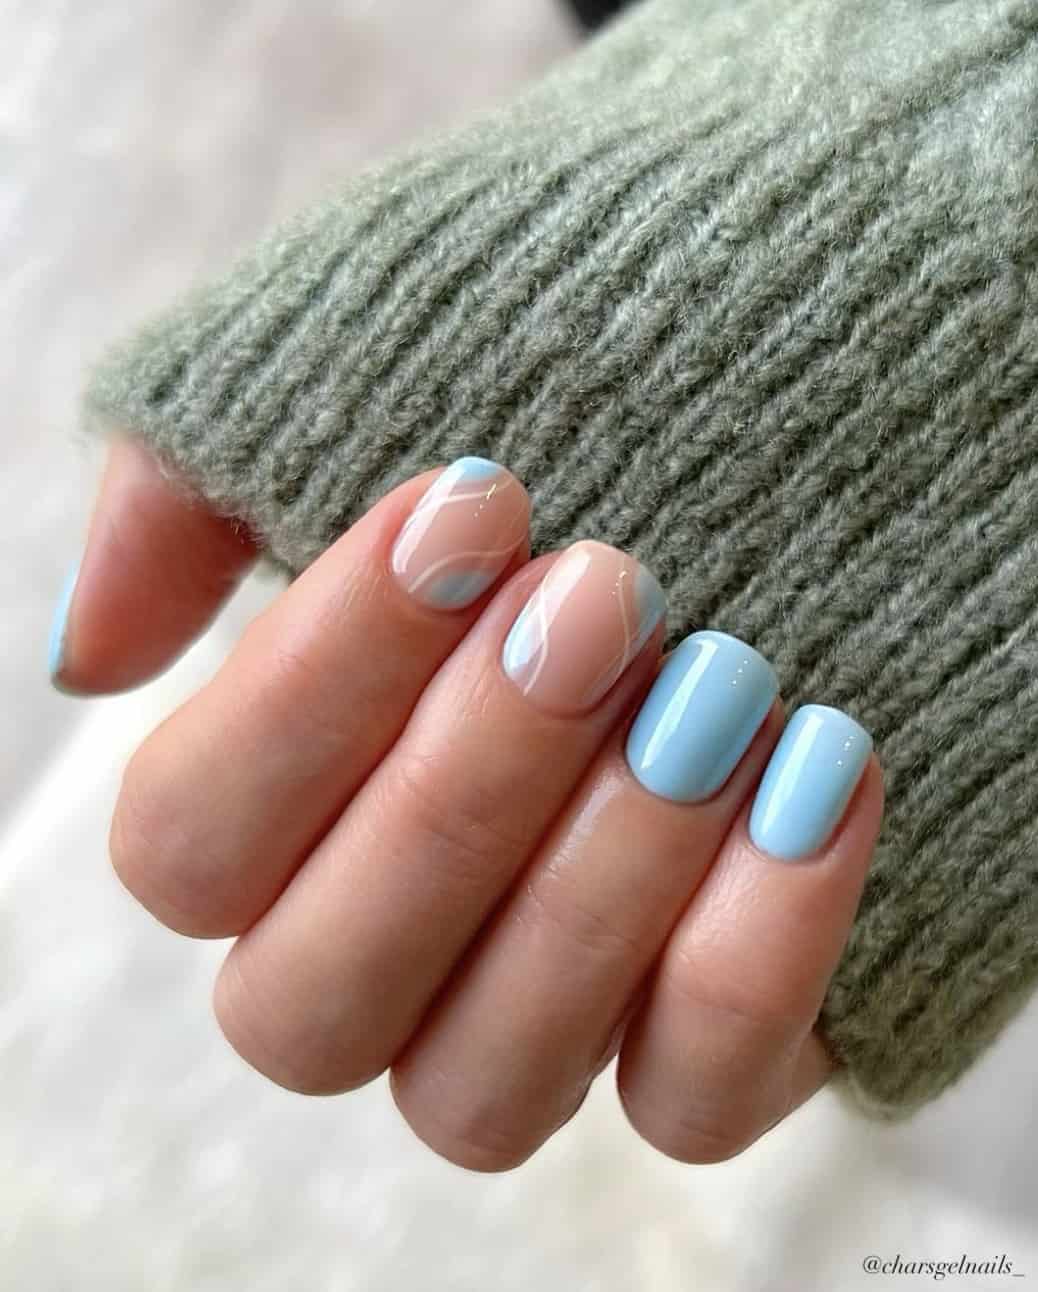 A hand with short squoval nails painted a baby blue color with nude accent nails with a baby blue and white nail design